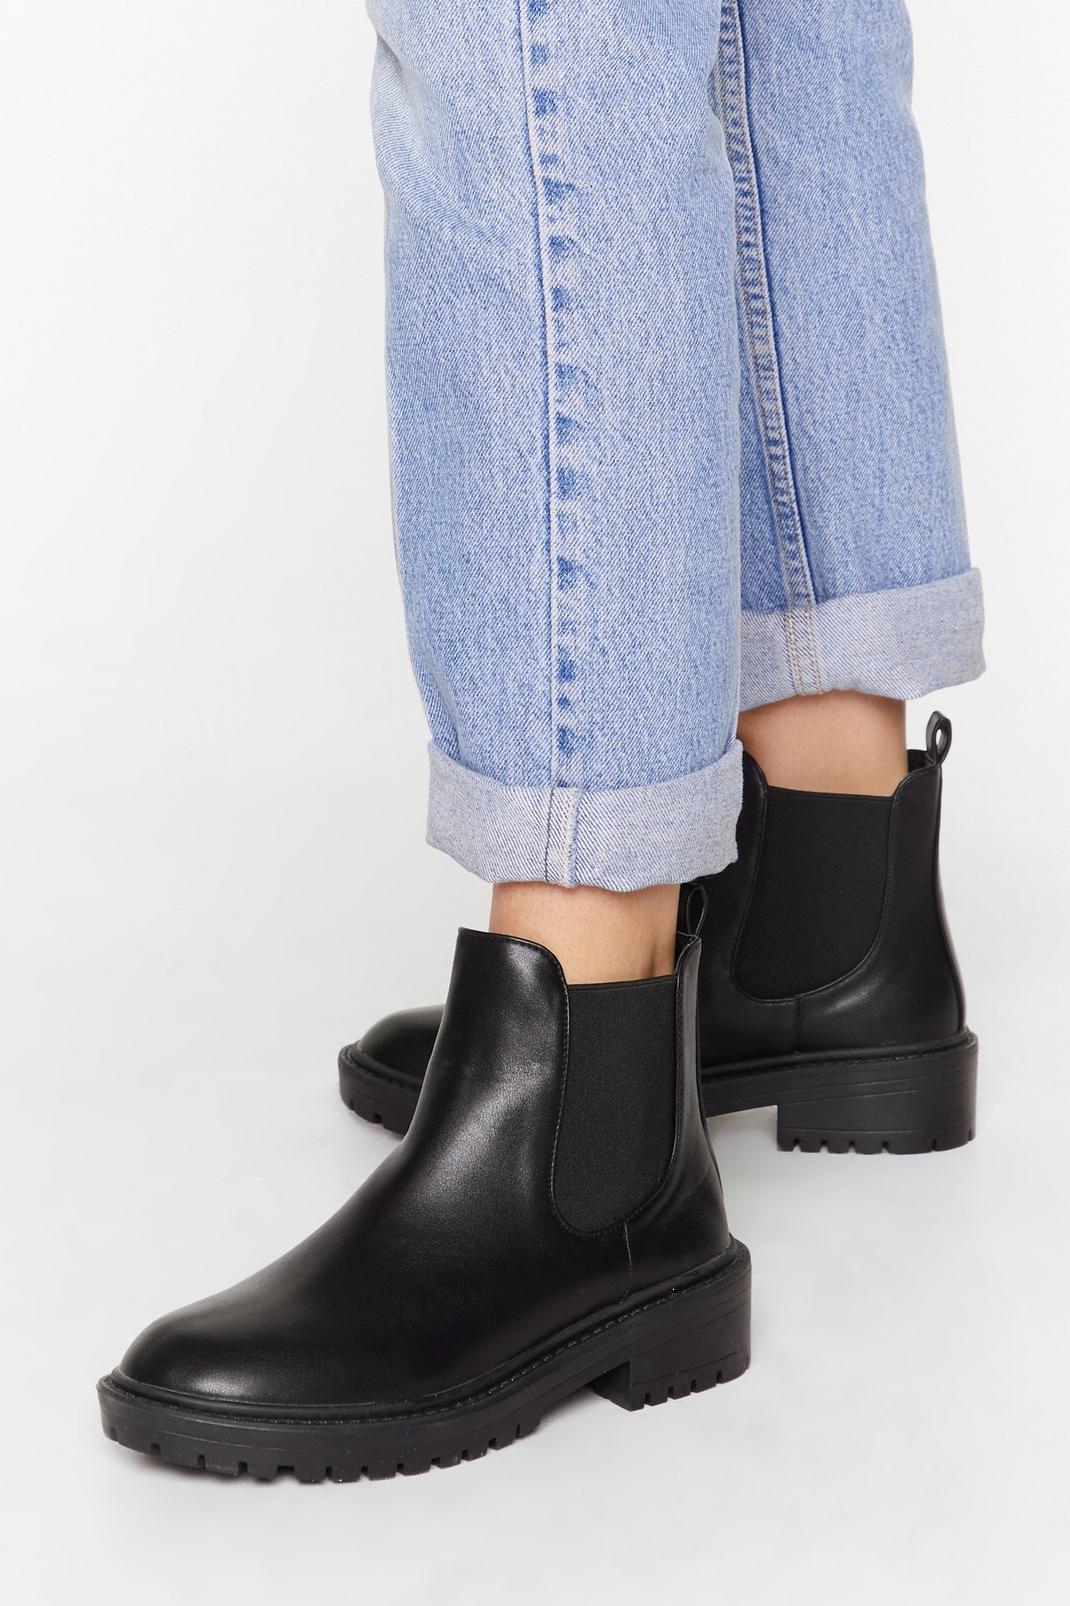 Keepin' It Low-Key Faux Leather Cleated Boots image number 1